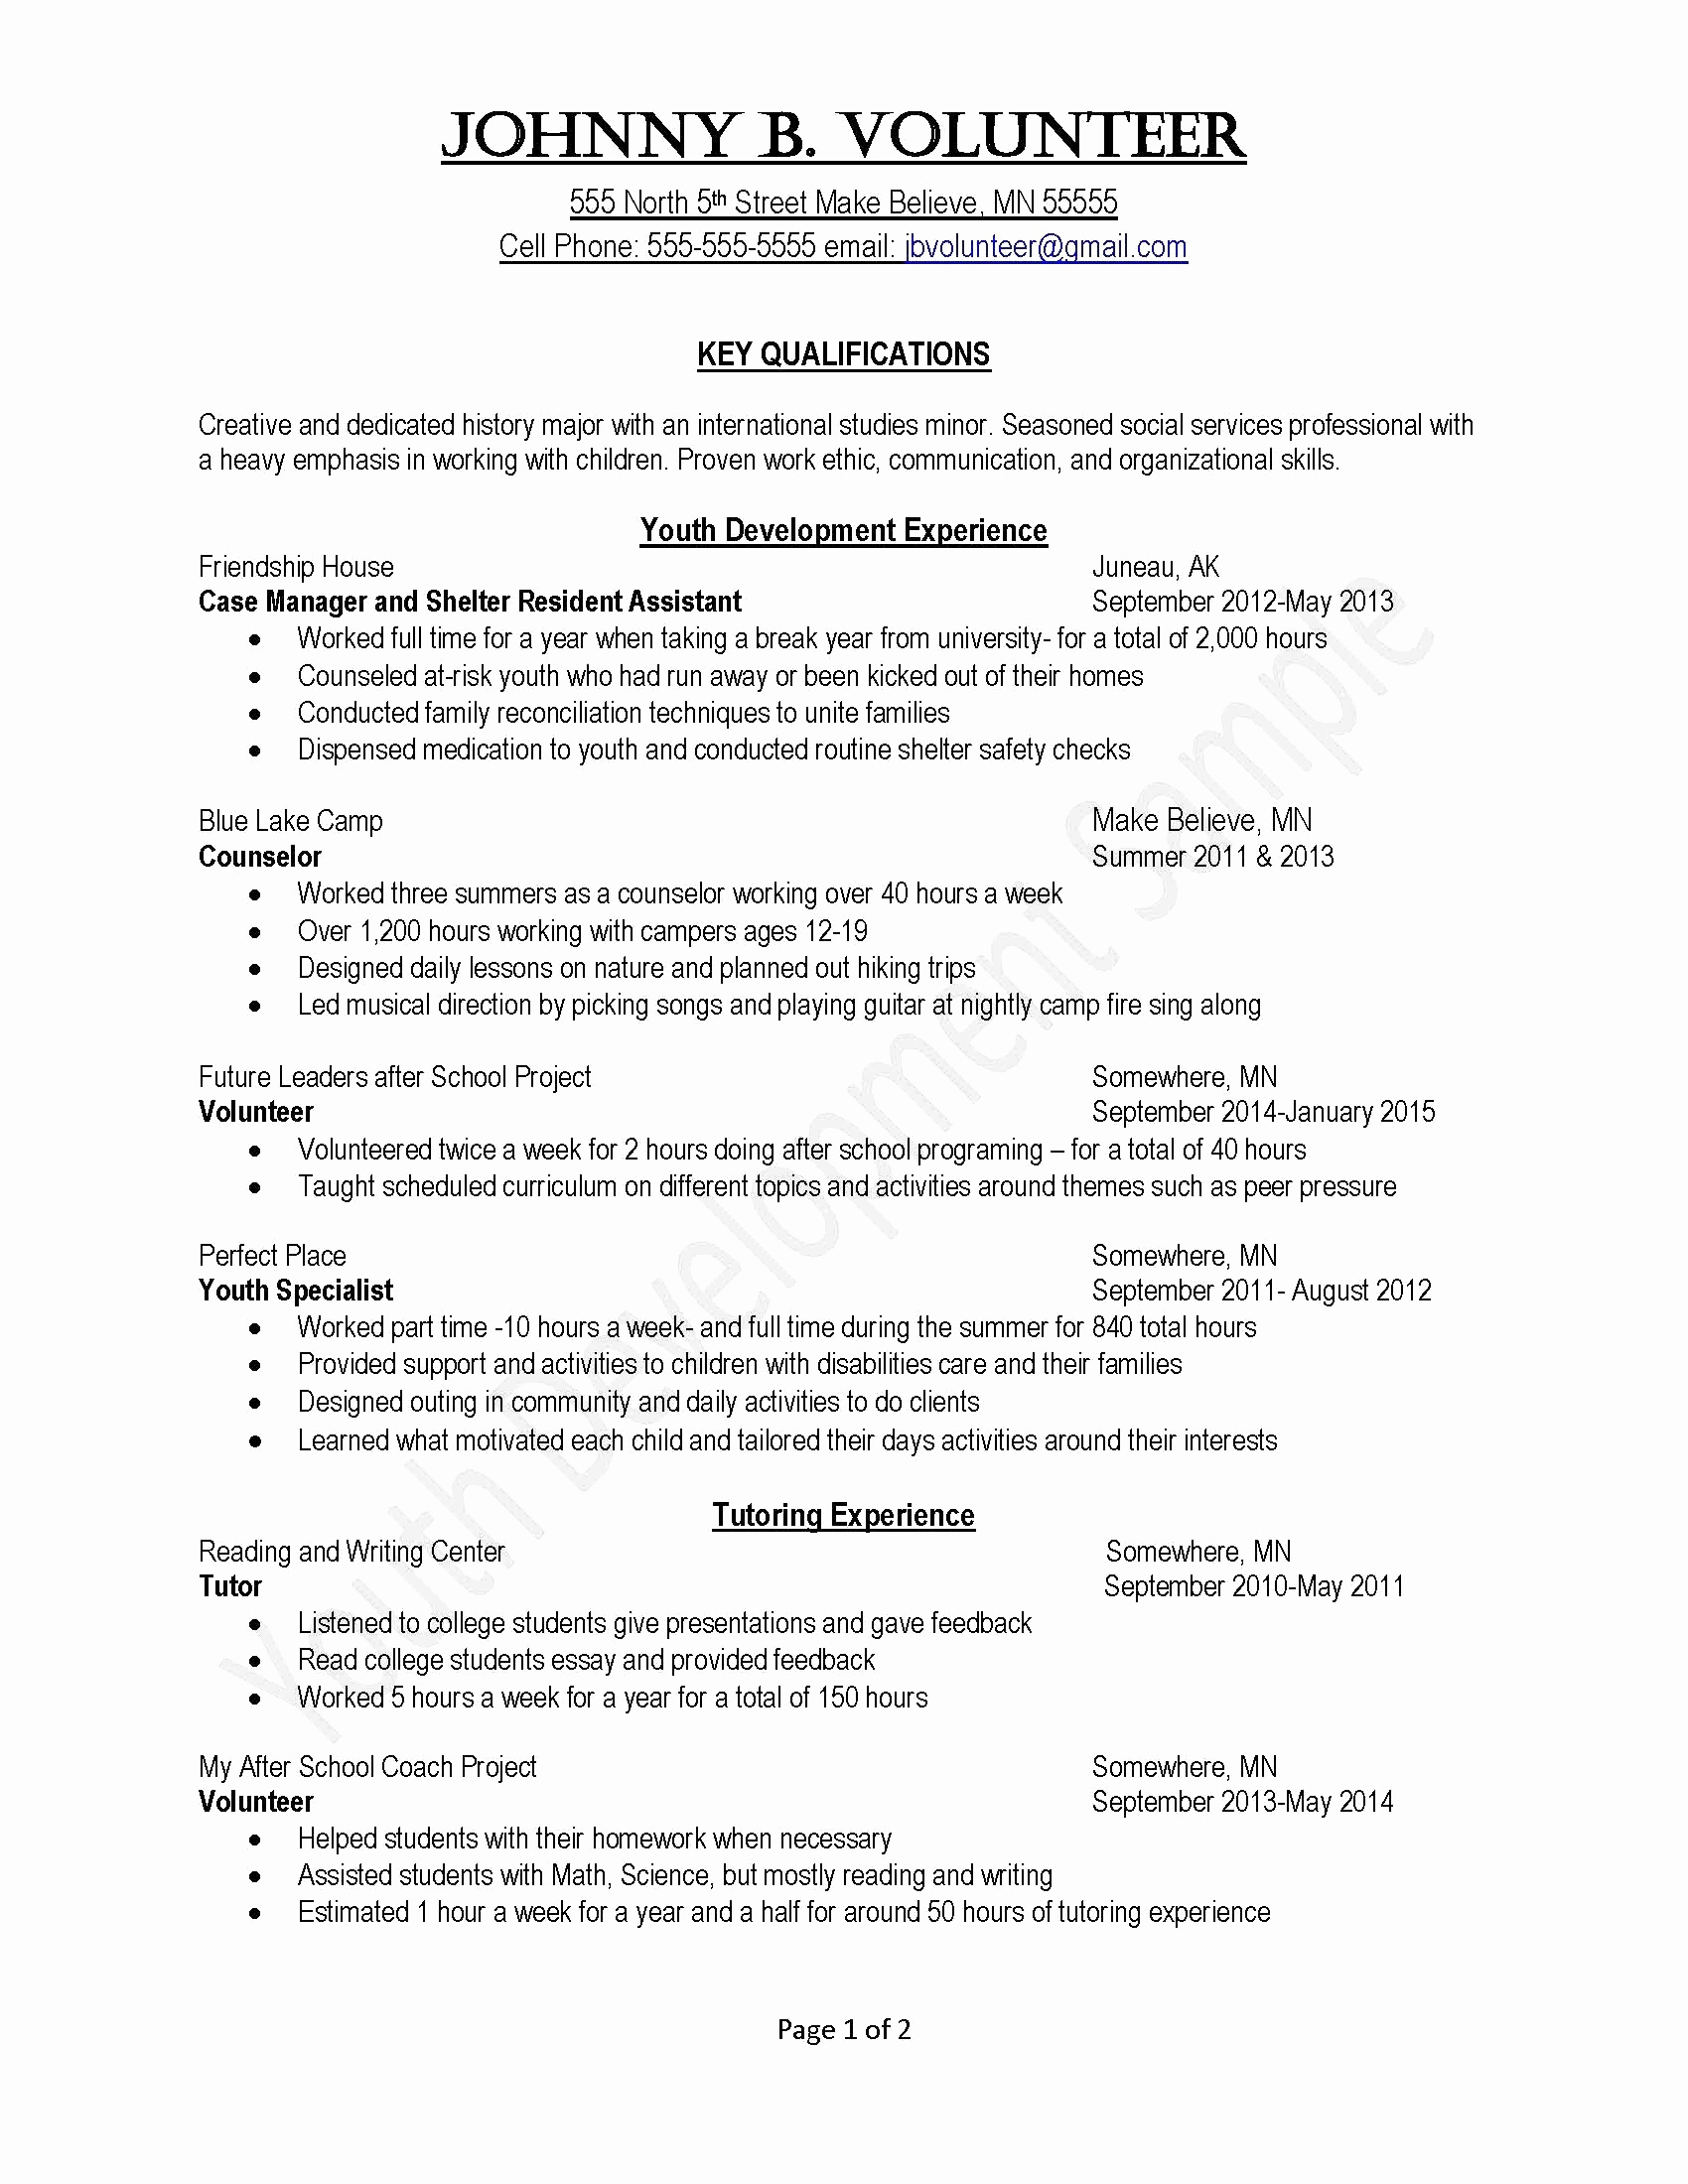 Electronic Cover Letter Template - Good Cover Letters for Jobs Unique Simple Cover Letter Template